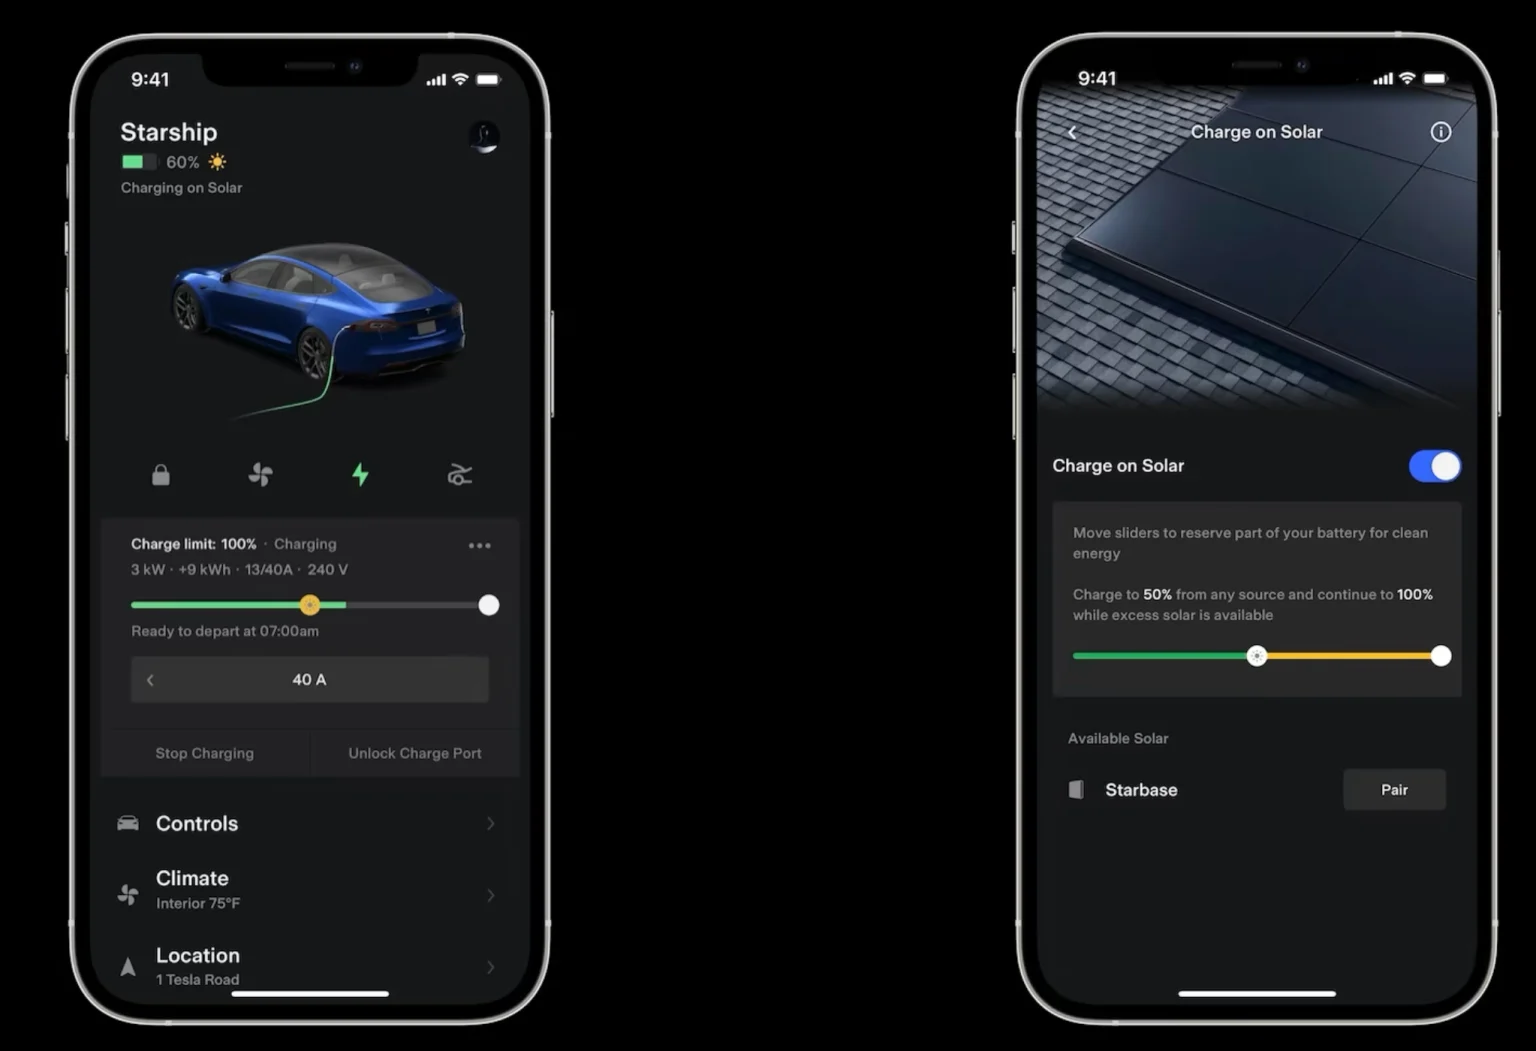 Screenshots of Tesla's new Charge on Solar feature.